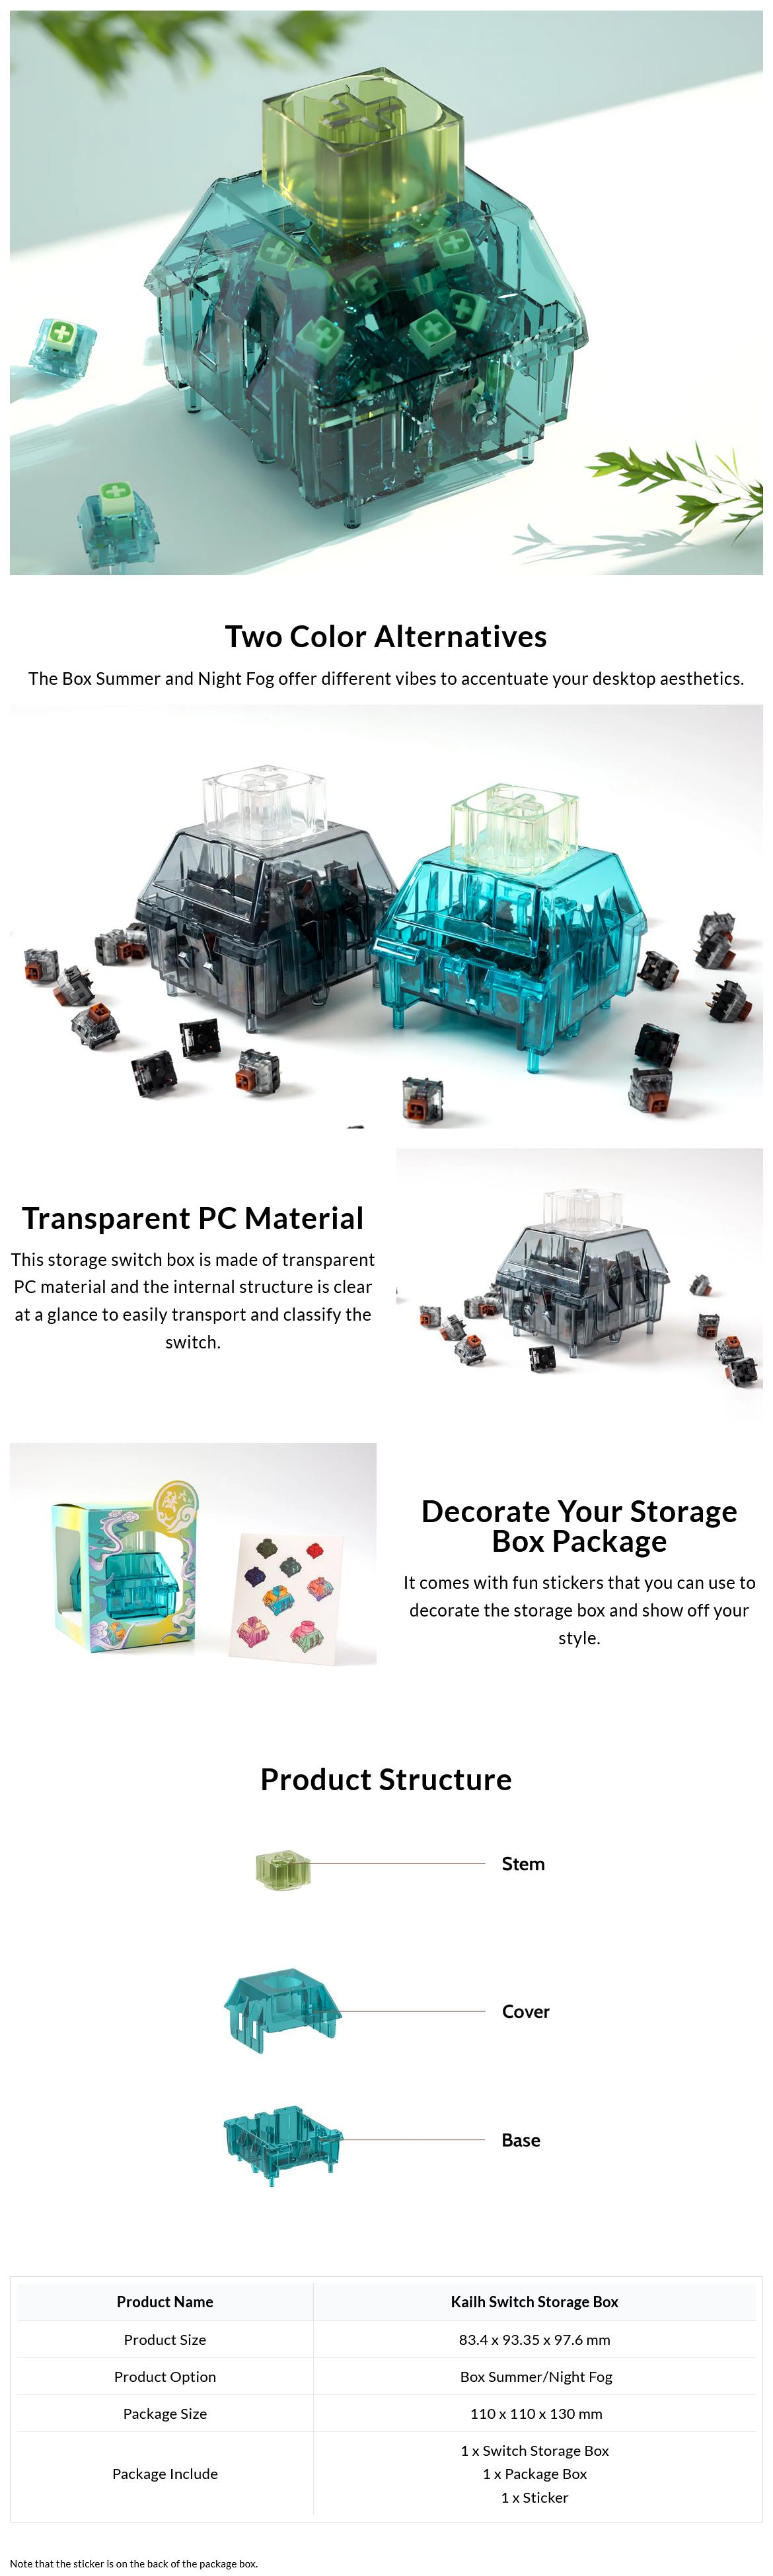 A large marketing image providing additional information about the product Keychron Kailh Switch Storage Box - Box Summer - Additional alt info not provided